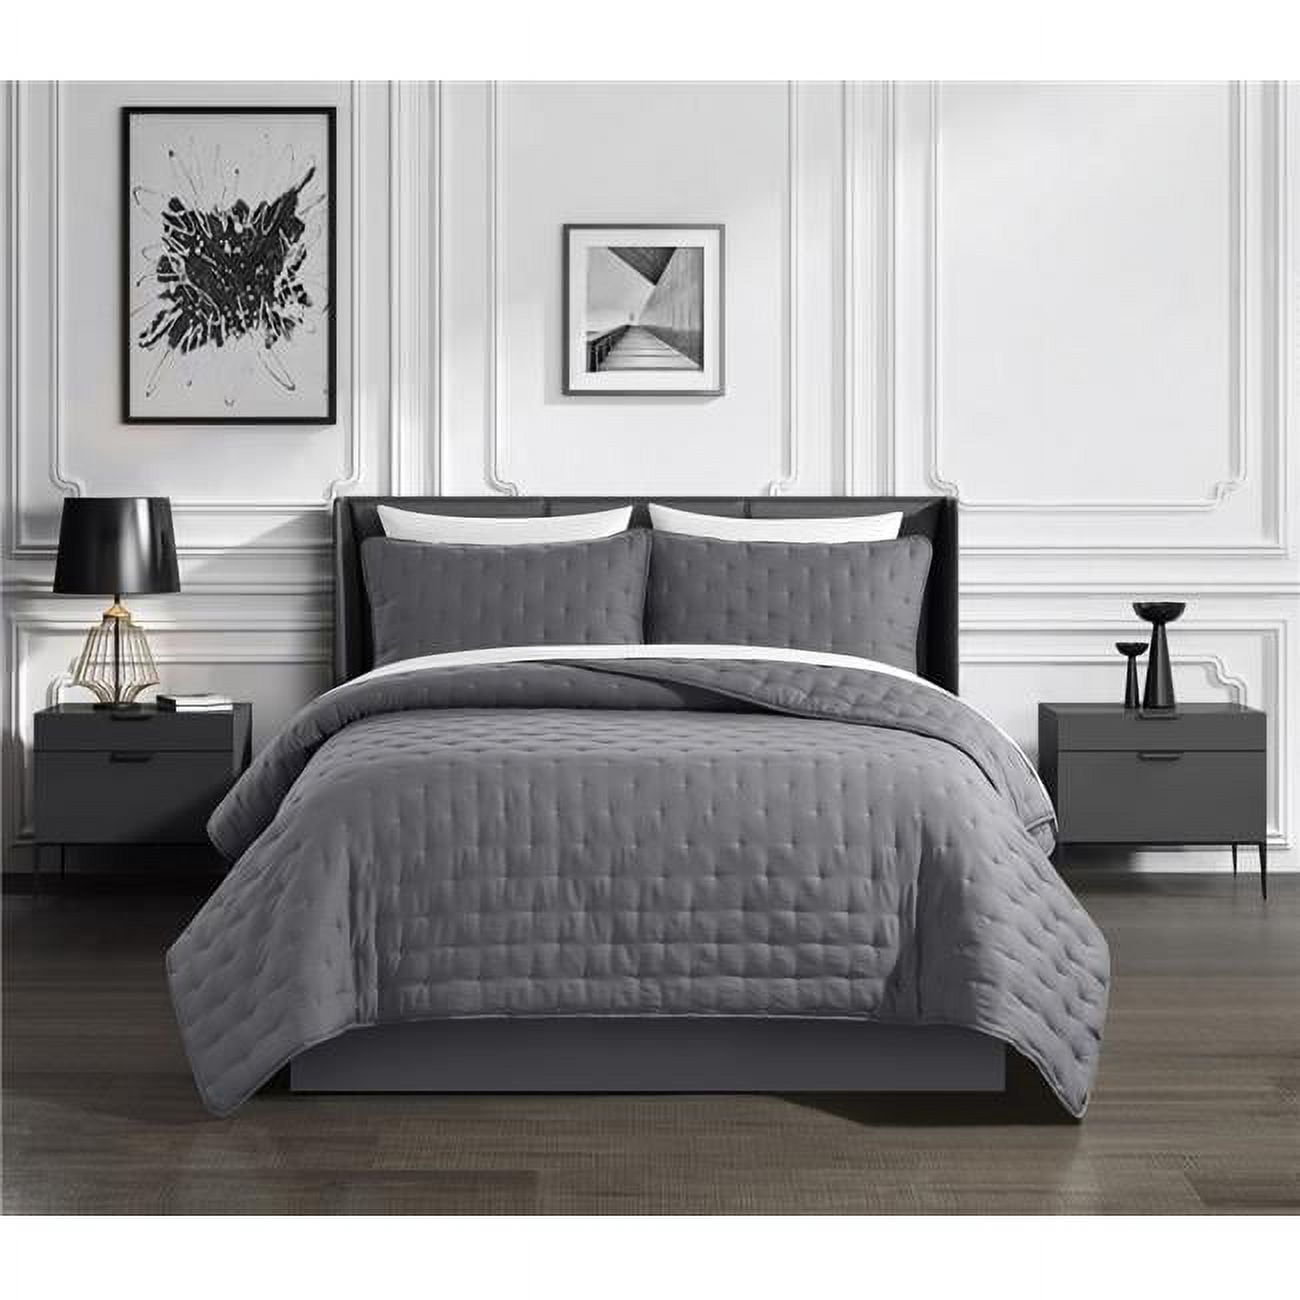 Picture of Chic Home BQS19400-US Kaceyn 3 Piece Quilt Set with Tufted Cross Stitched Design Bedding - Pillow Shams&#44; Grey - Queen Size